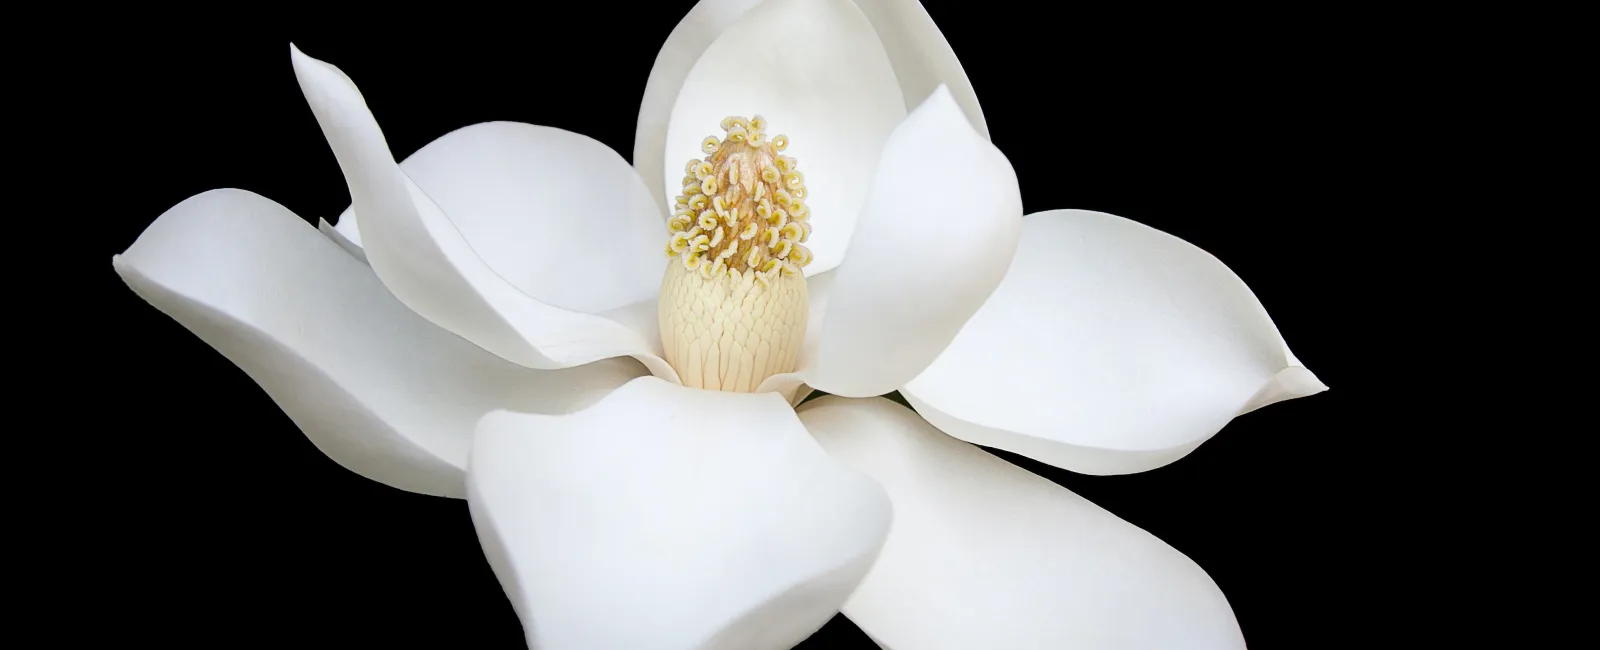 Featured image for “Can Little Gem Magnolia Trees Survive in Georgia?”